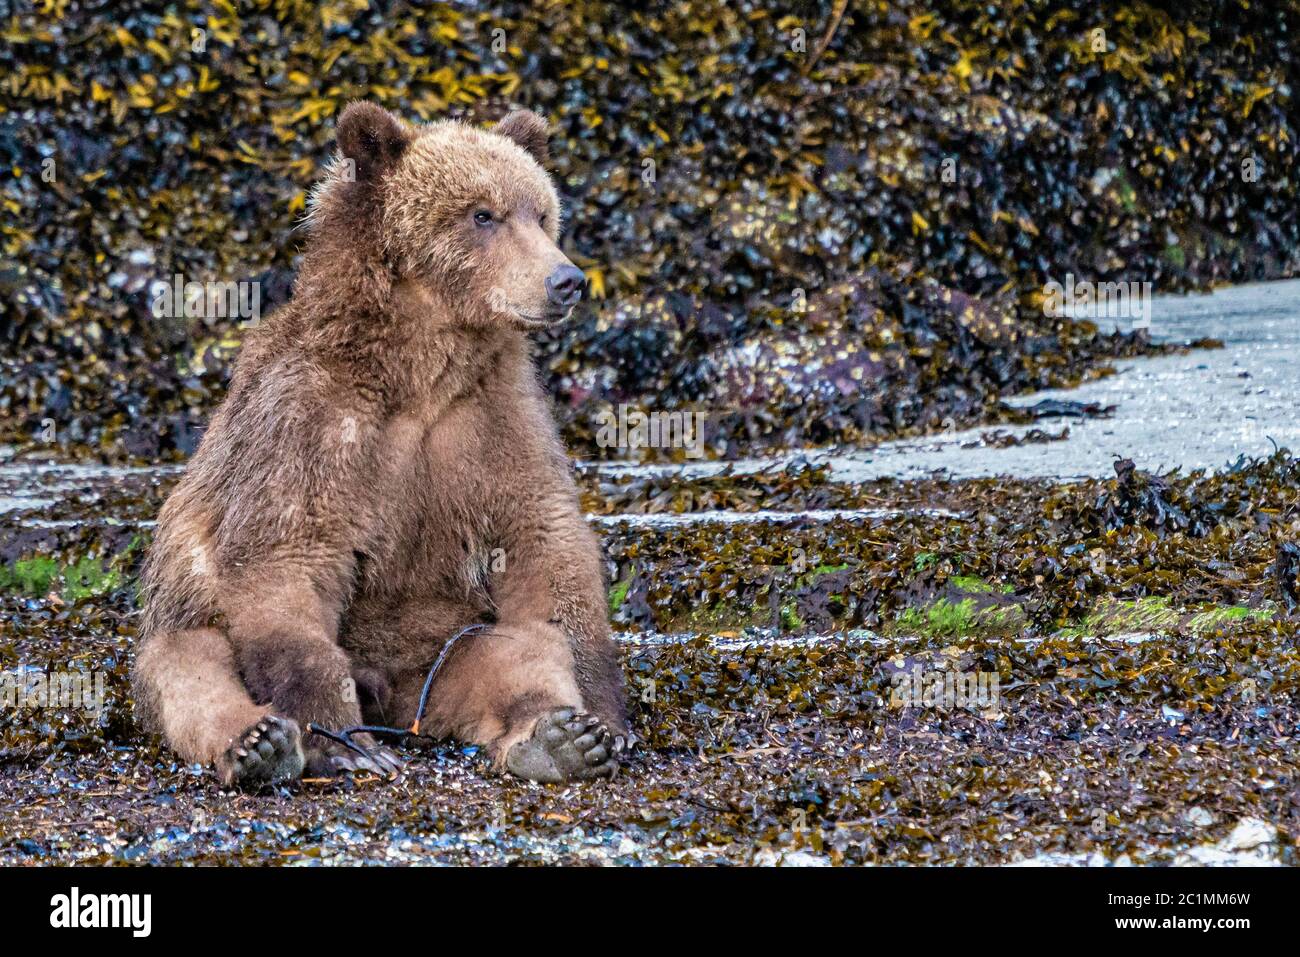 3 year old grizzly cub playing and resting while looking all cute at low tide in Knight Inlet, First Nations Territory, British Columbia, Canada Stock Photo